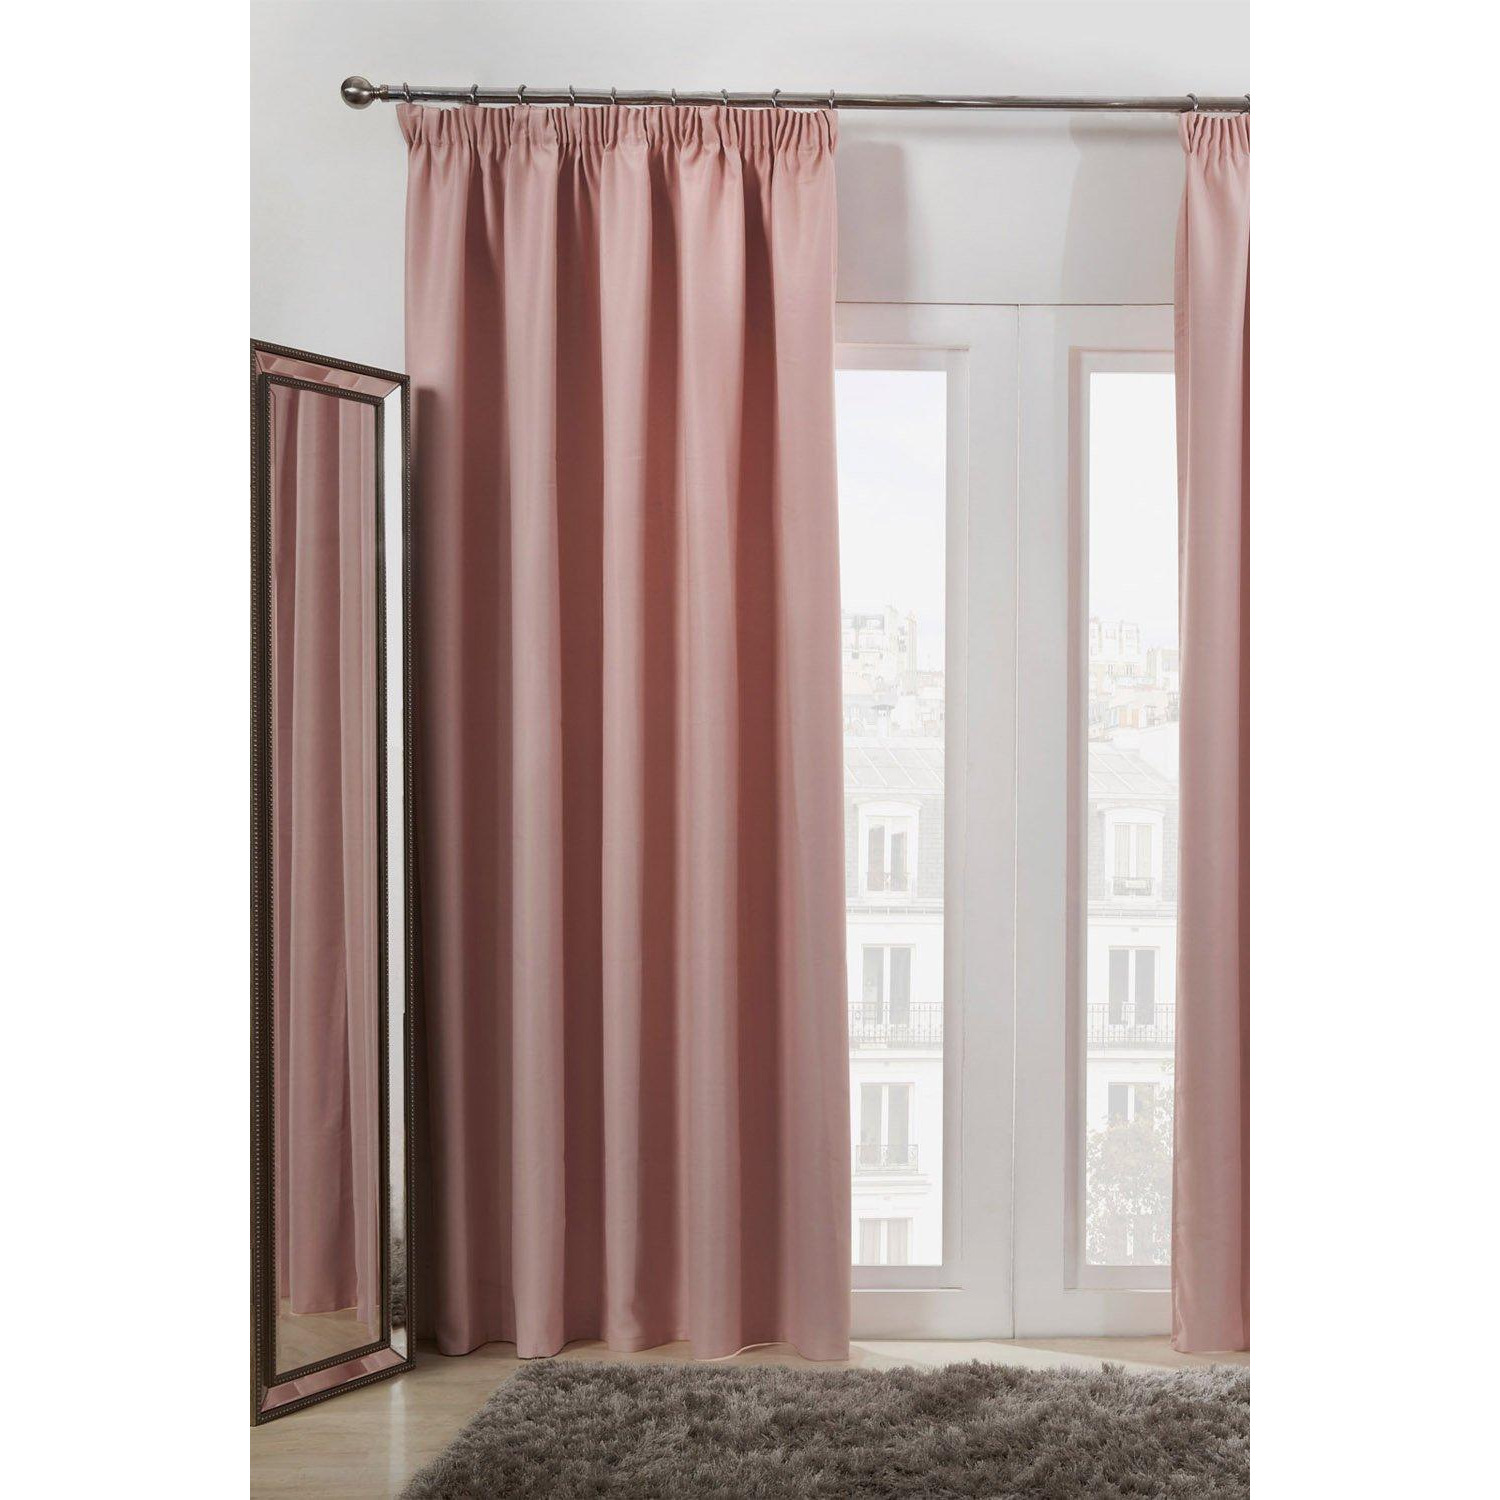 Pair of Ready Made Thermal Pencil Pleat Blackout Curtains - image 1